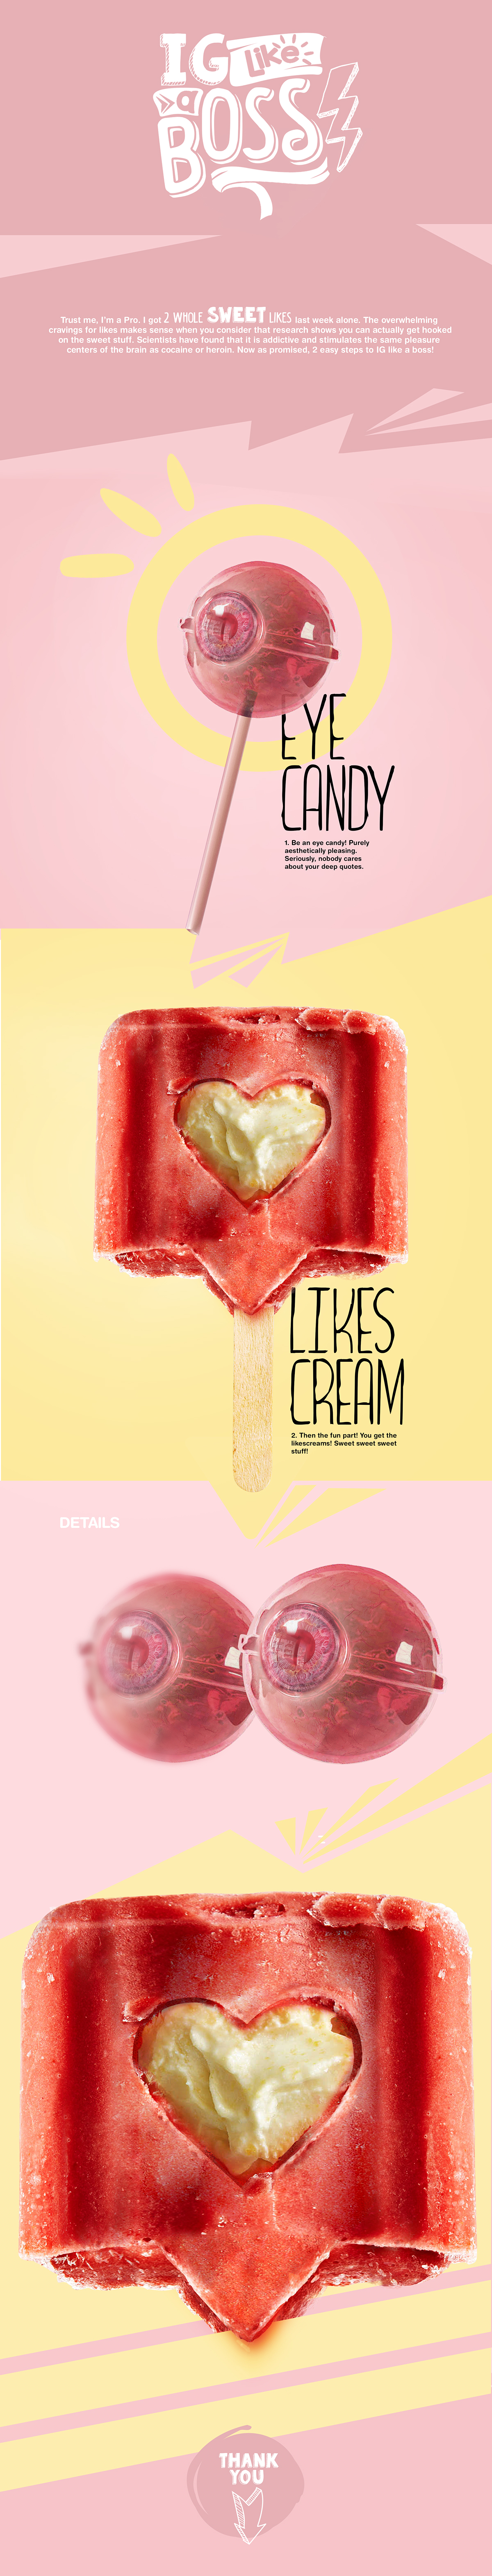 instagram Candy likes design colors creative ice cream popsicle eye 3D